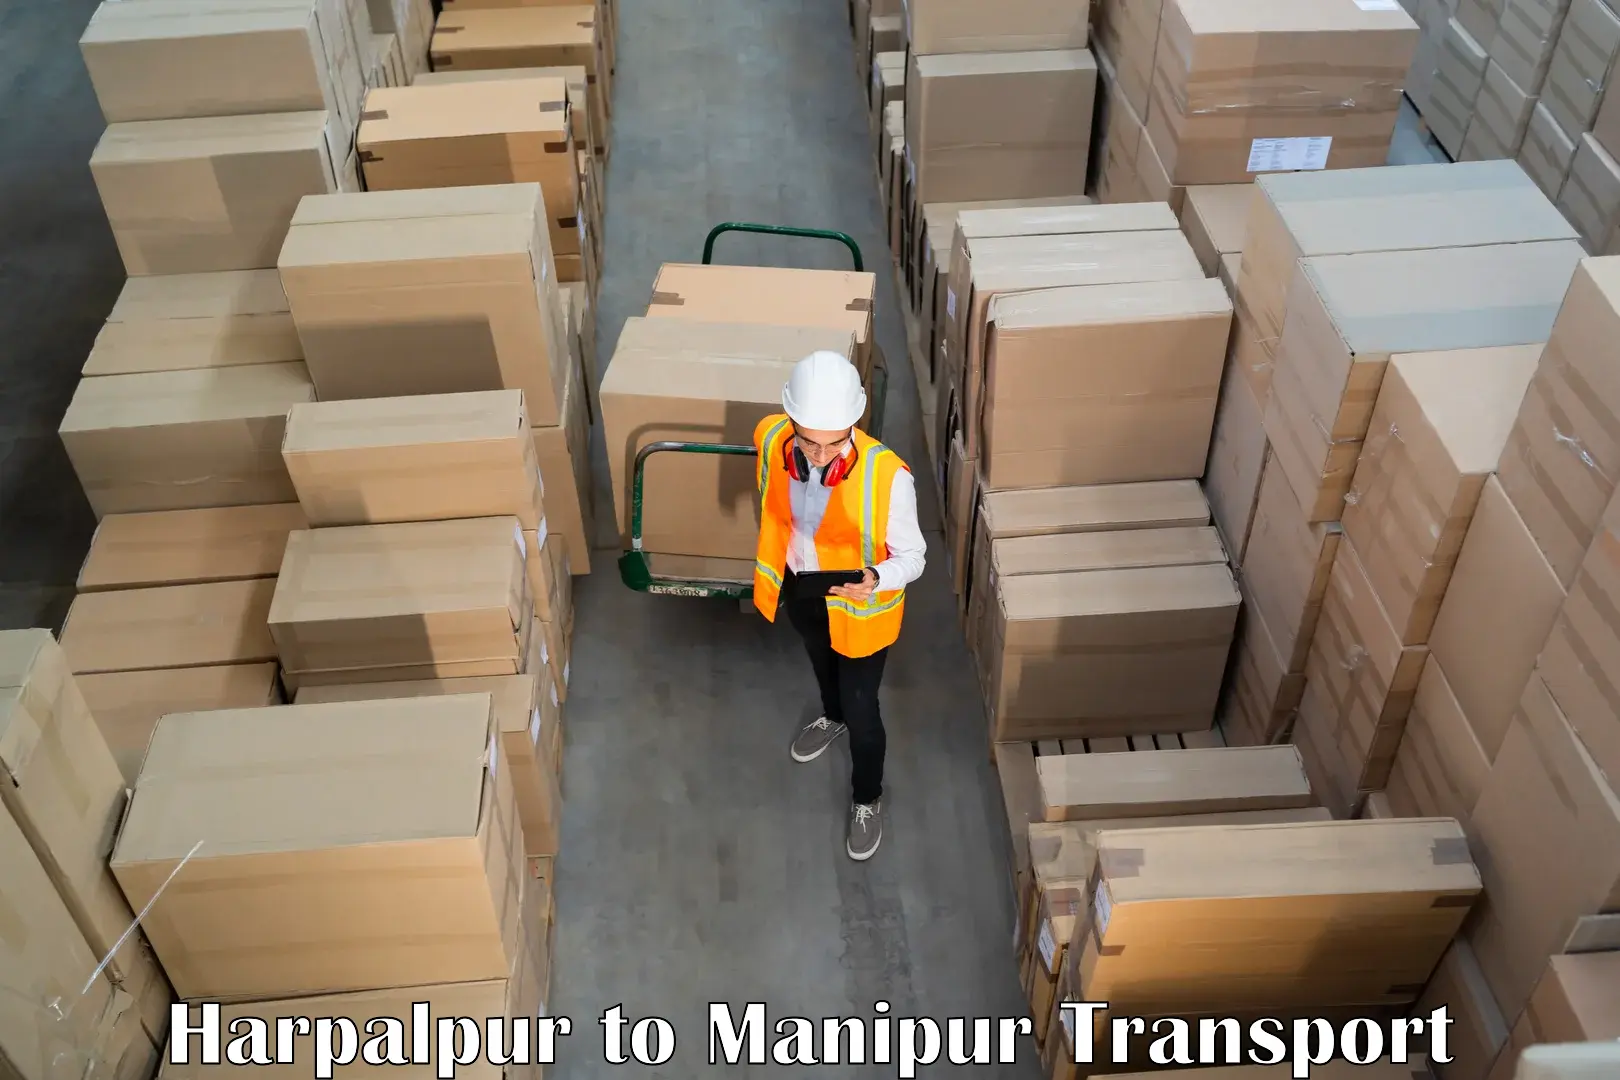 Delivery service Harpalpur to Manipur